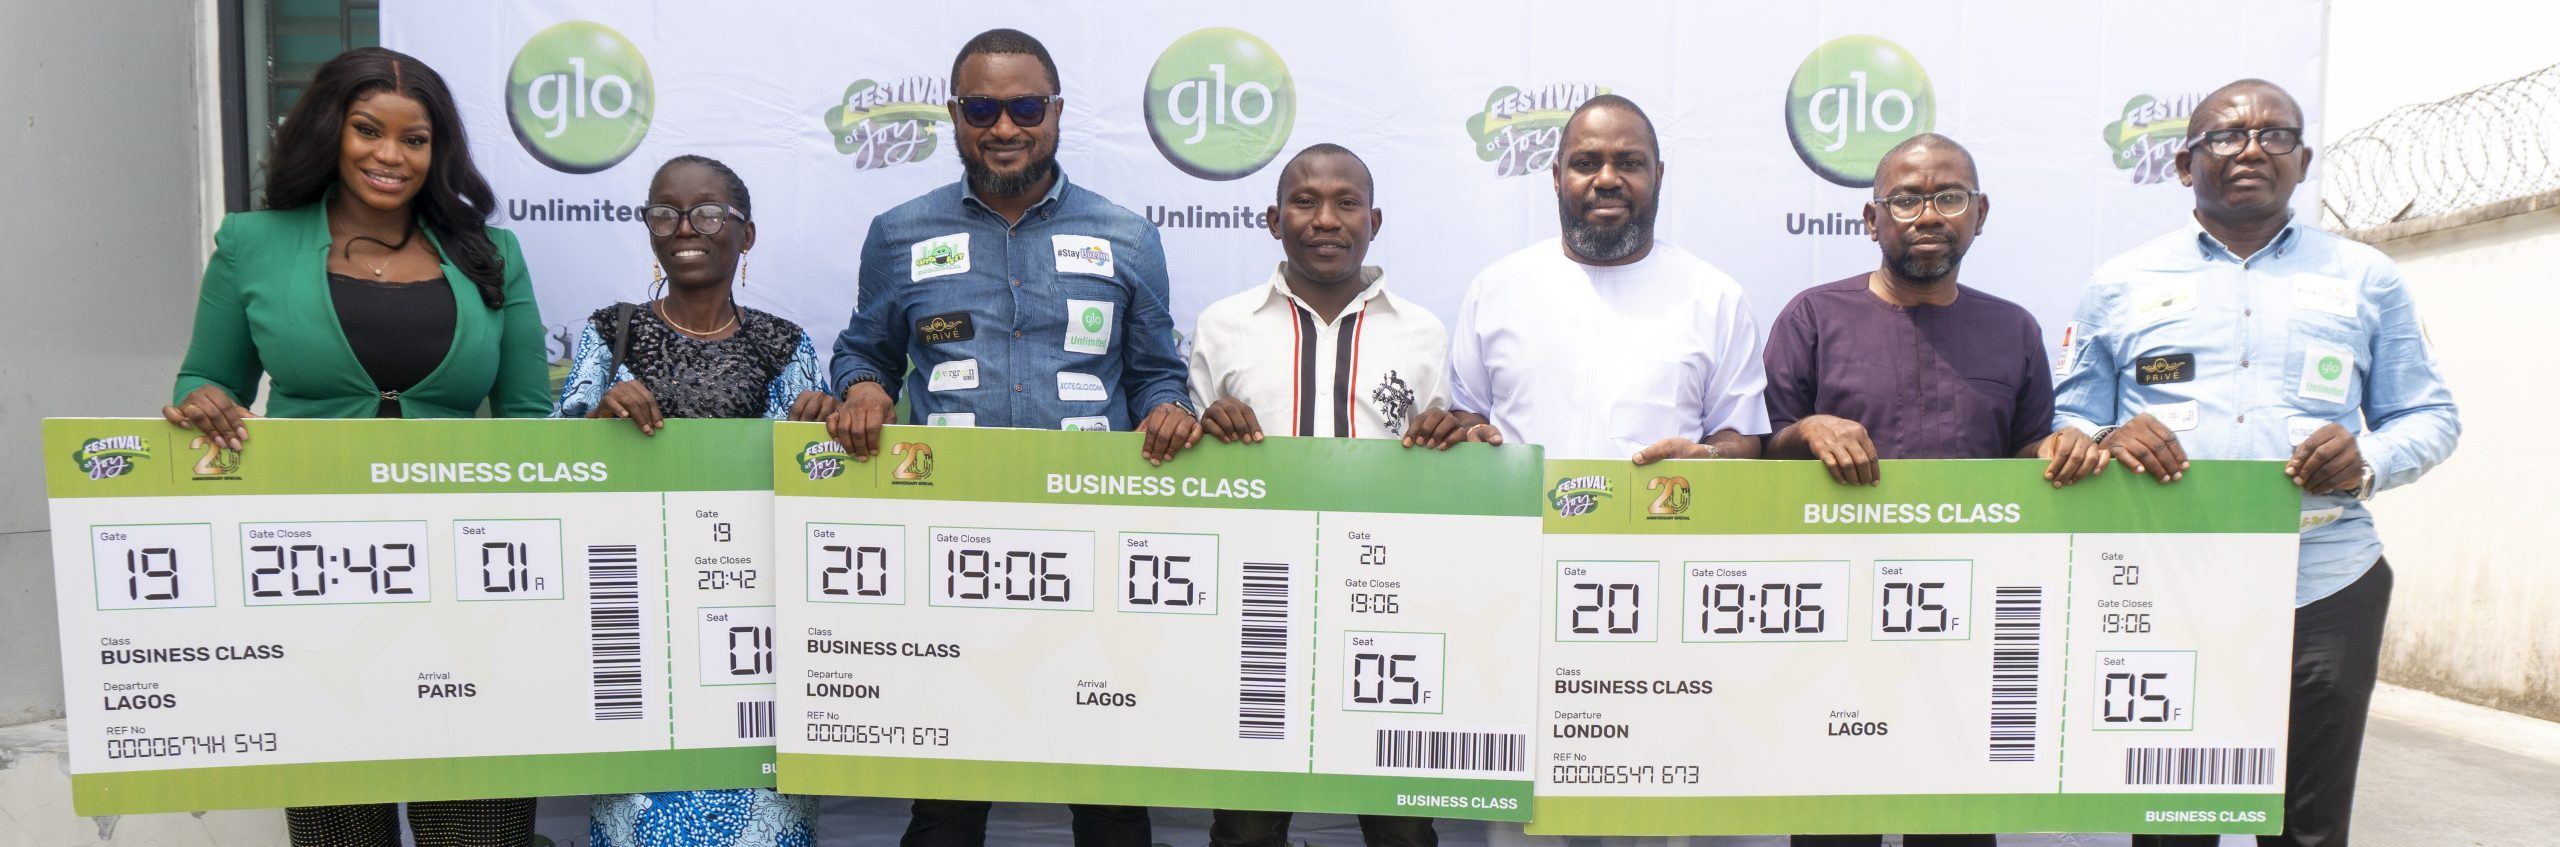 Glo Presents Business Class Return Tickets To Europe To Subscribers In Lagos